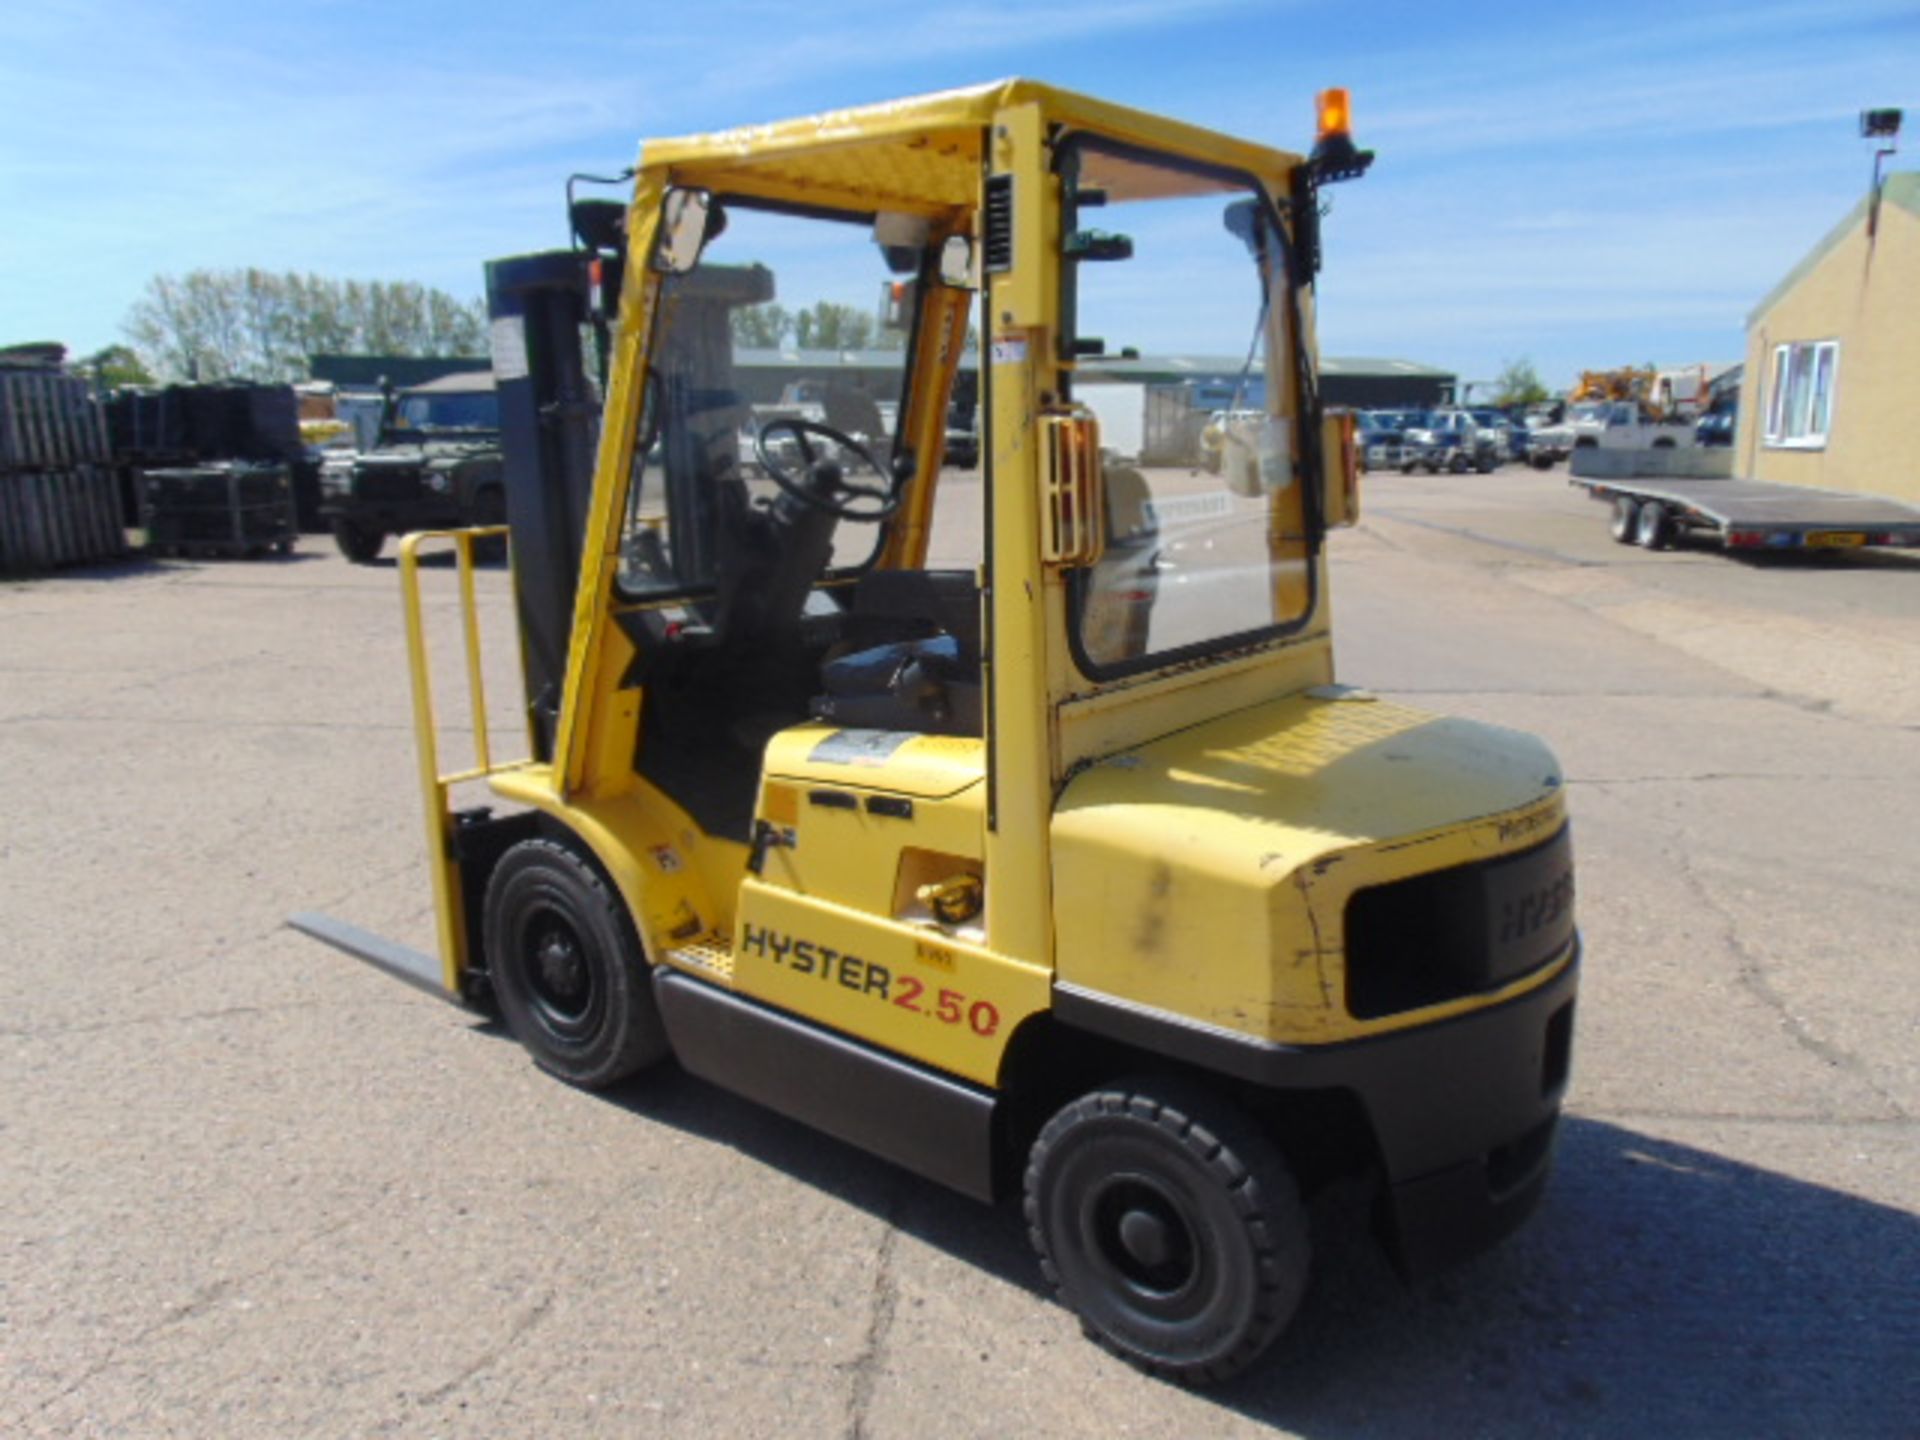 Hyster 2.50 Class C, Zone 2 Protected Diesel Forklift ONLY 763.4 hours!! - Image 6 of 29